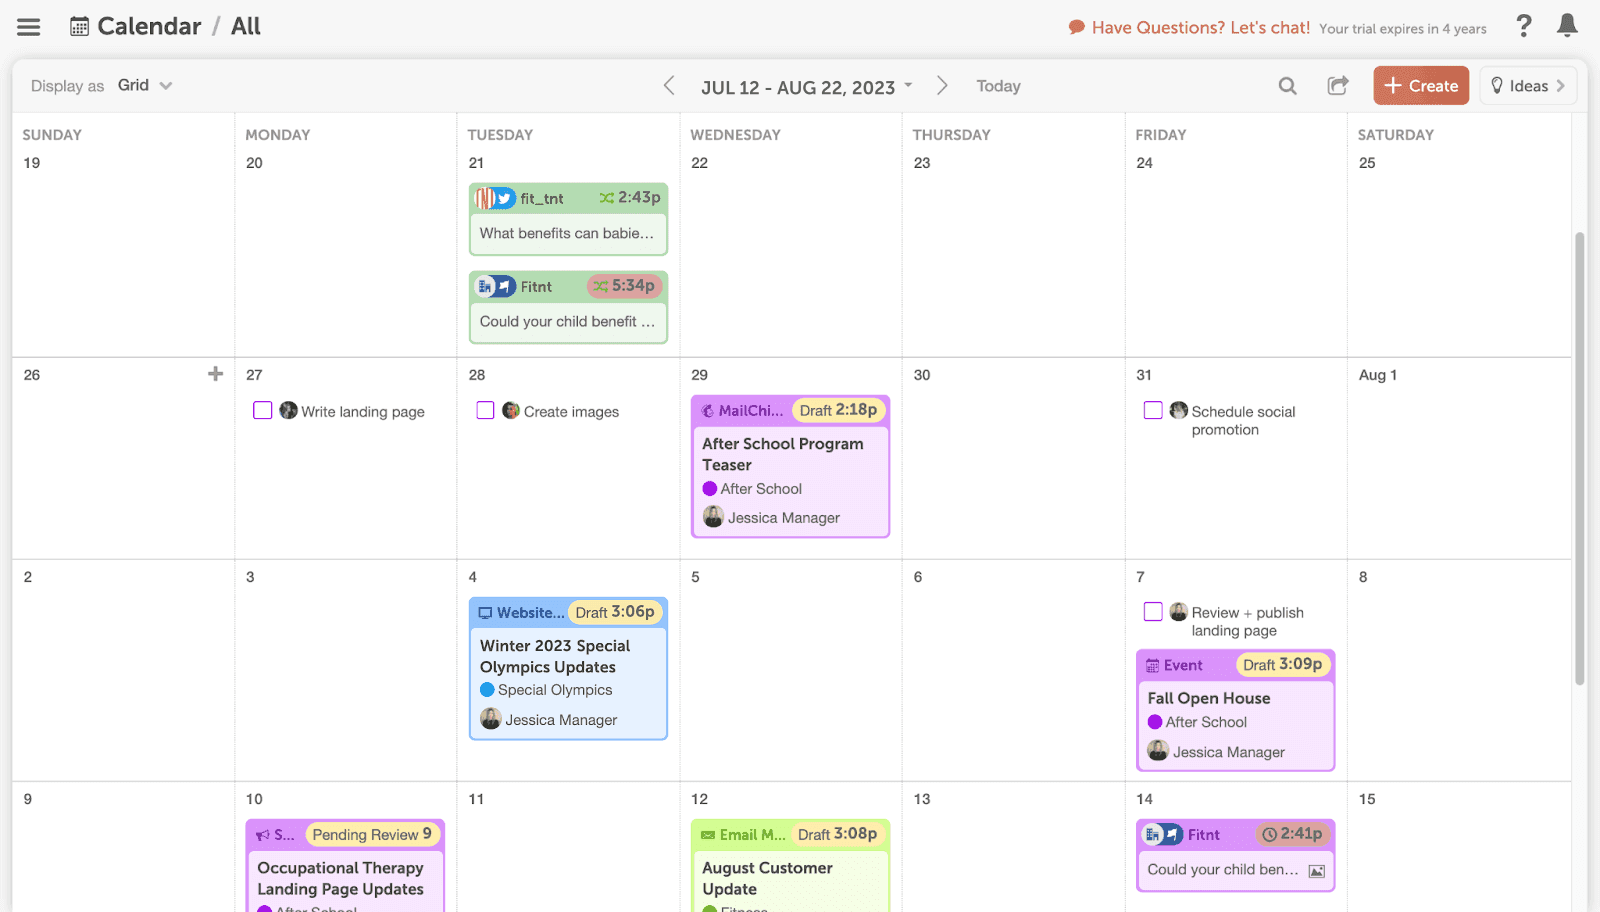 Another example of CoSchedule's marketing calendar